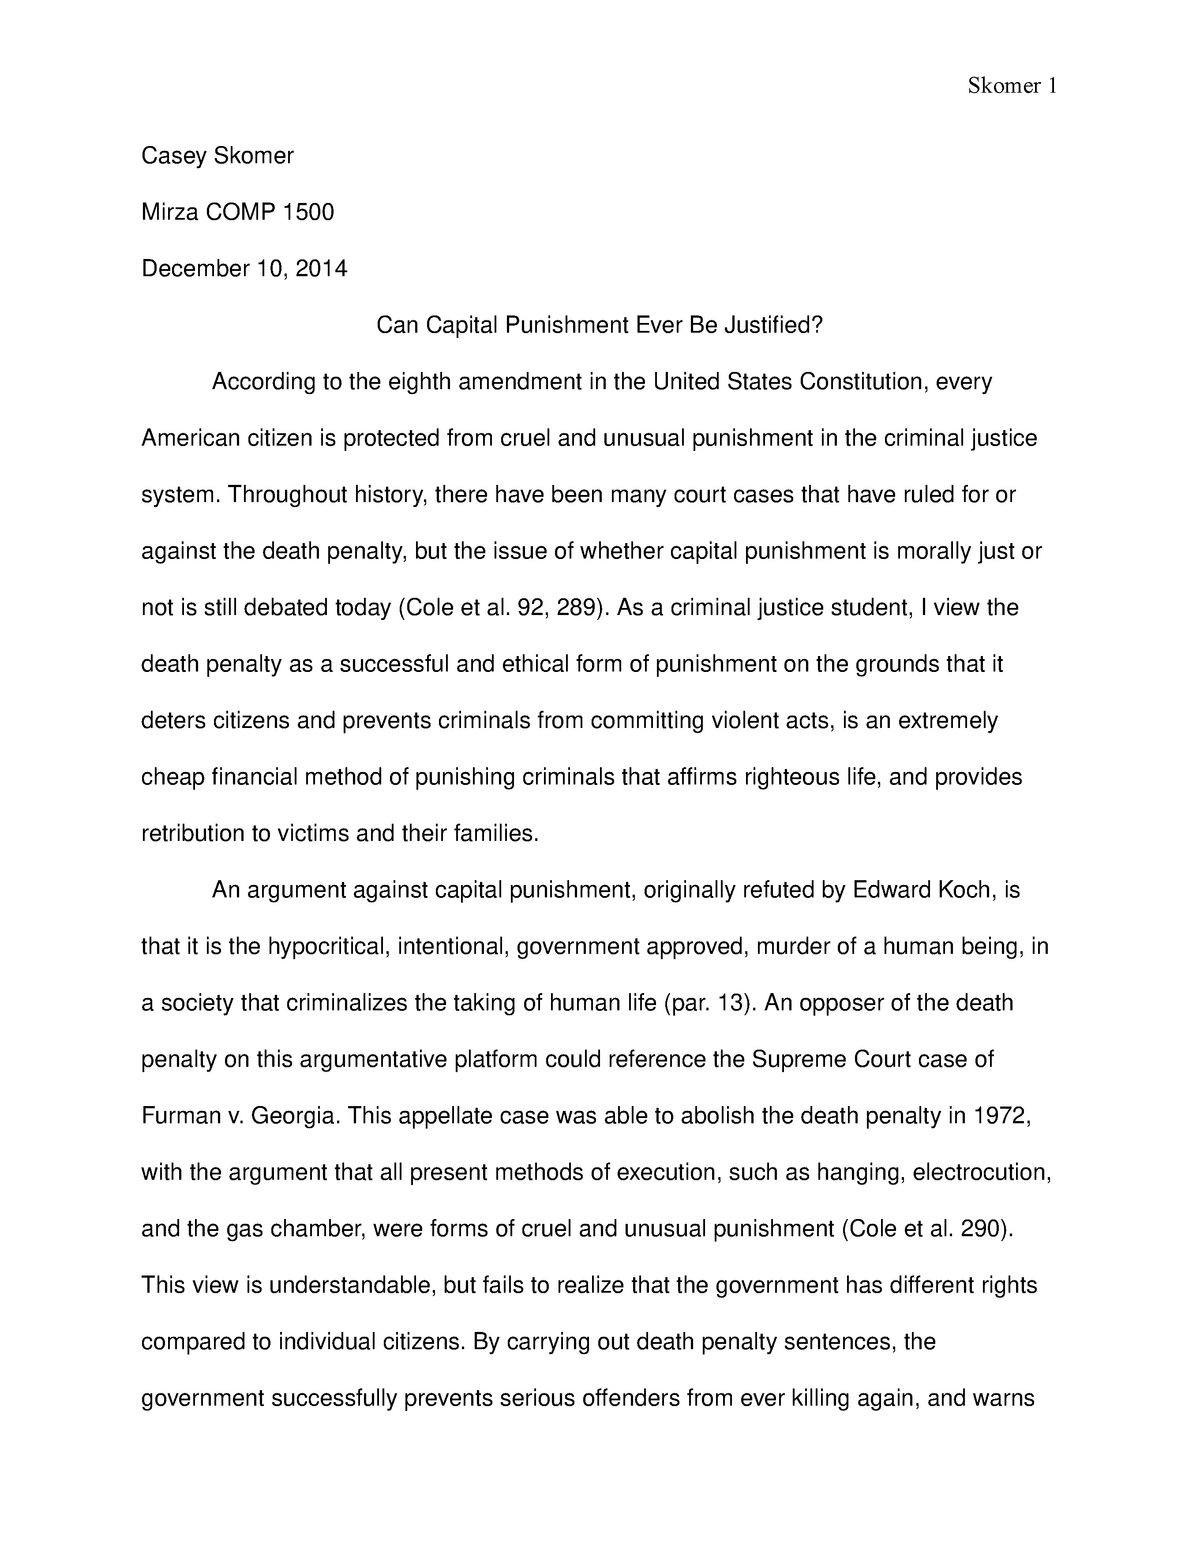 Cause and effect essay war c dc md resume